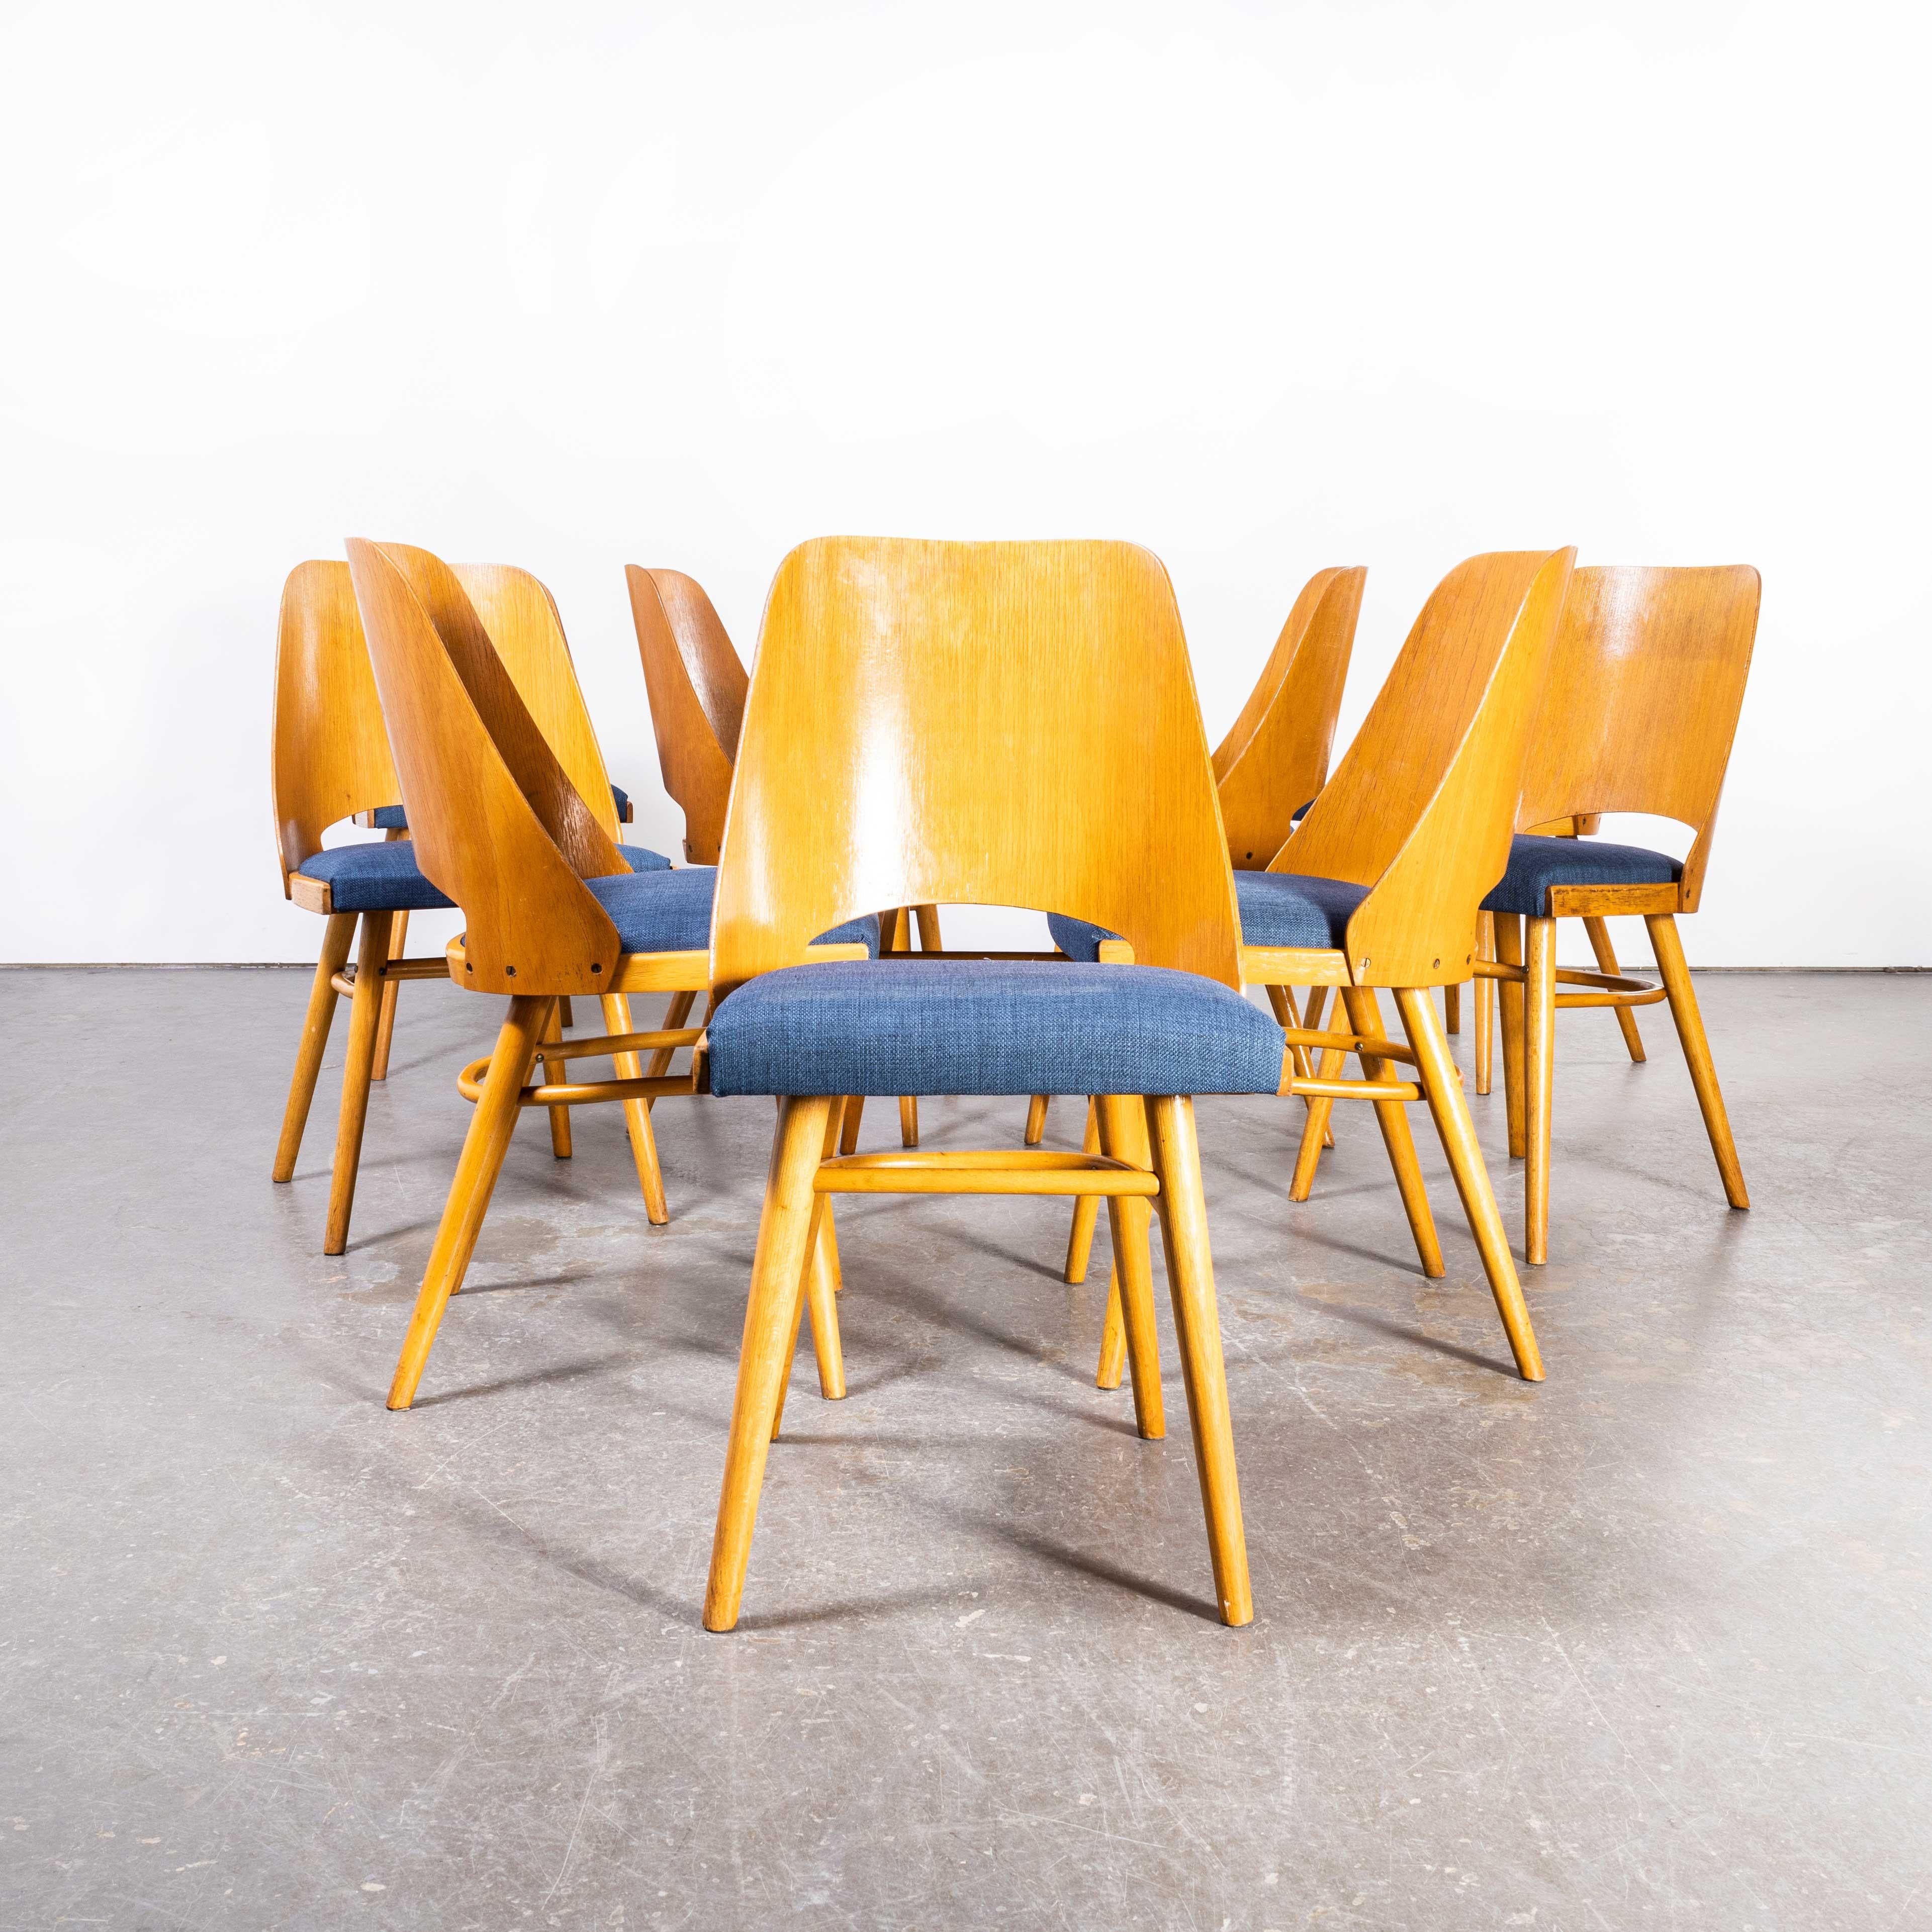 1950's Re -Upholstered Thon Light Oak Chairs By Radomir Hoffman - Set Of Ten For Sale 2